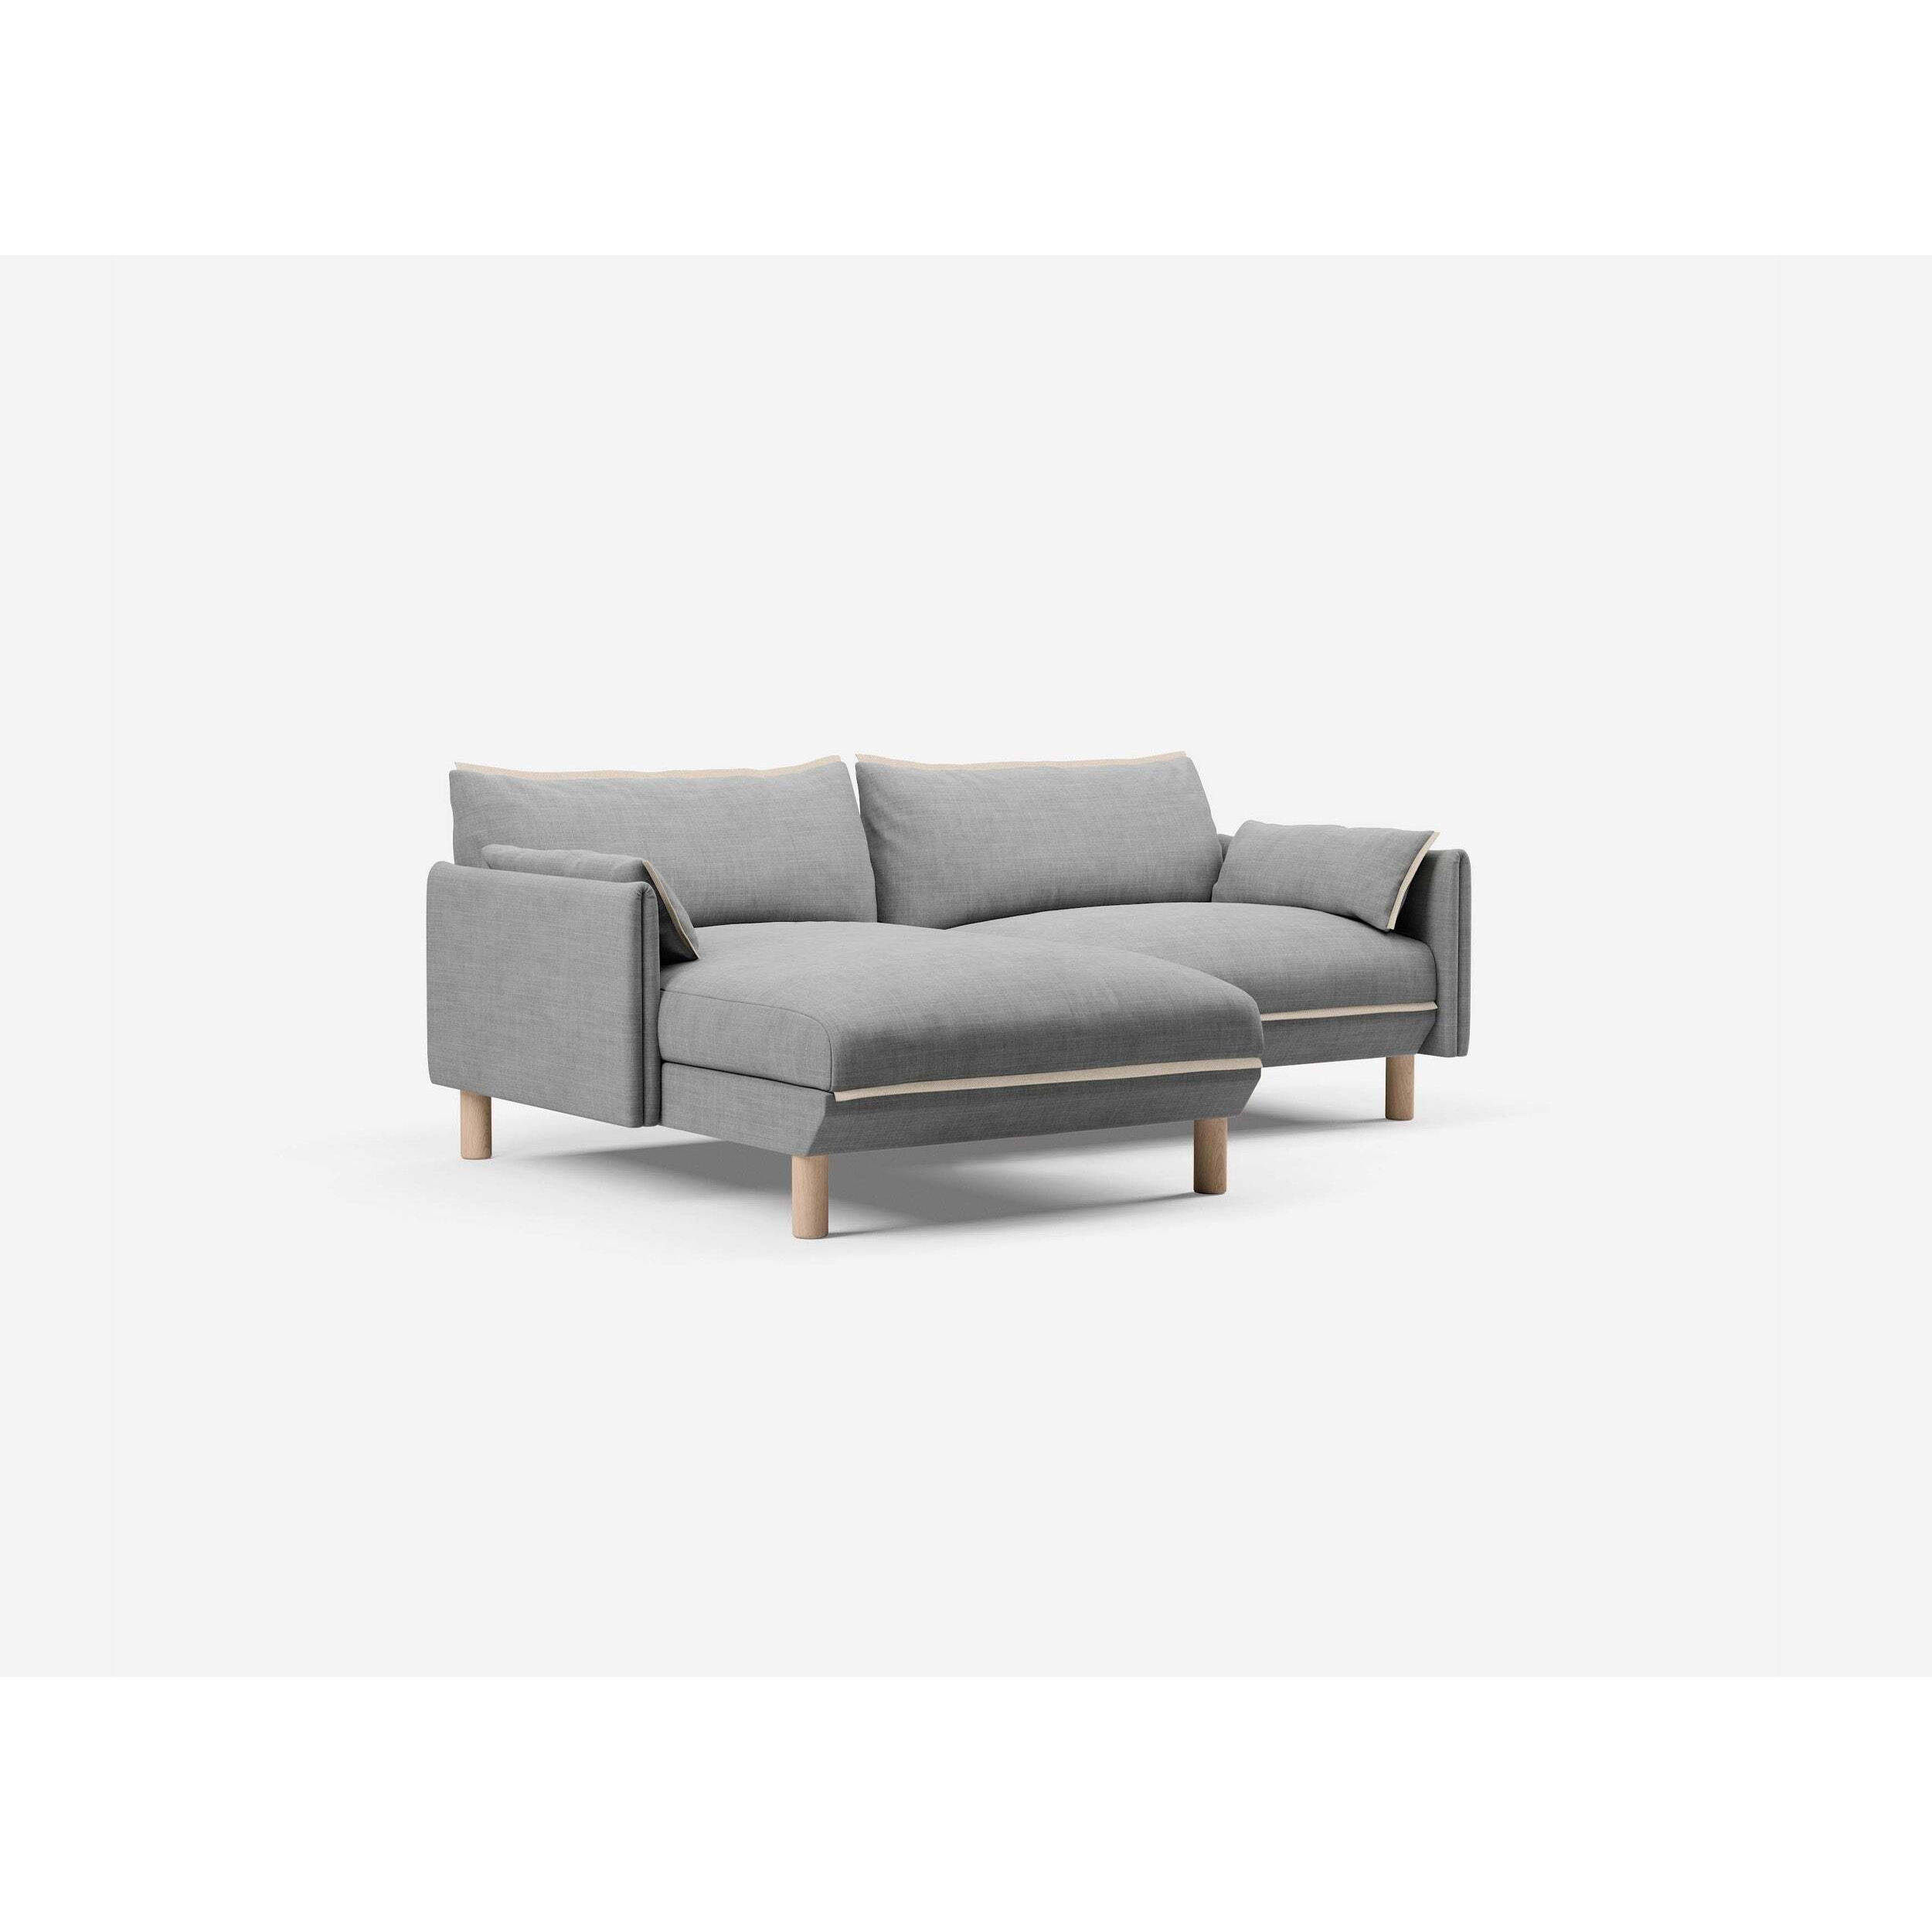 3 Seater LH Chaise Sofa - Light Grey Weave - image 1